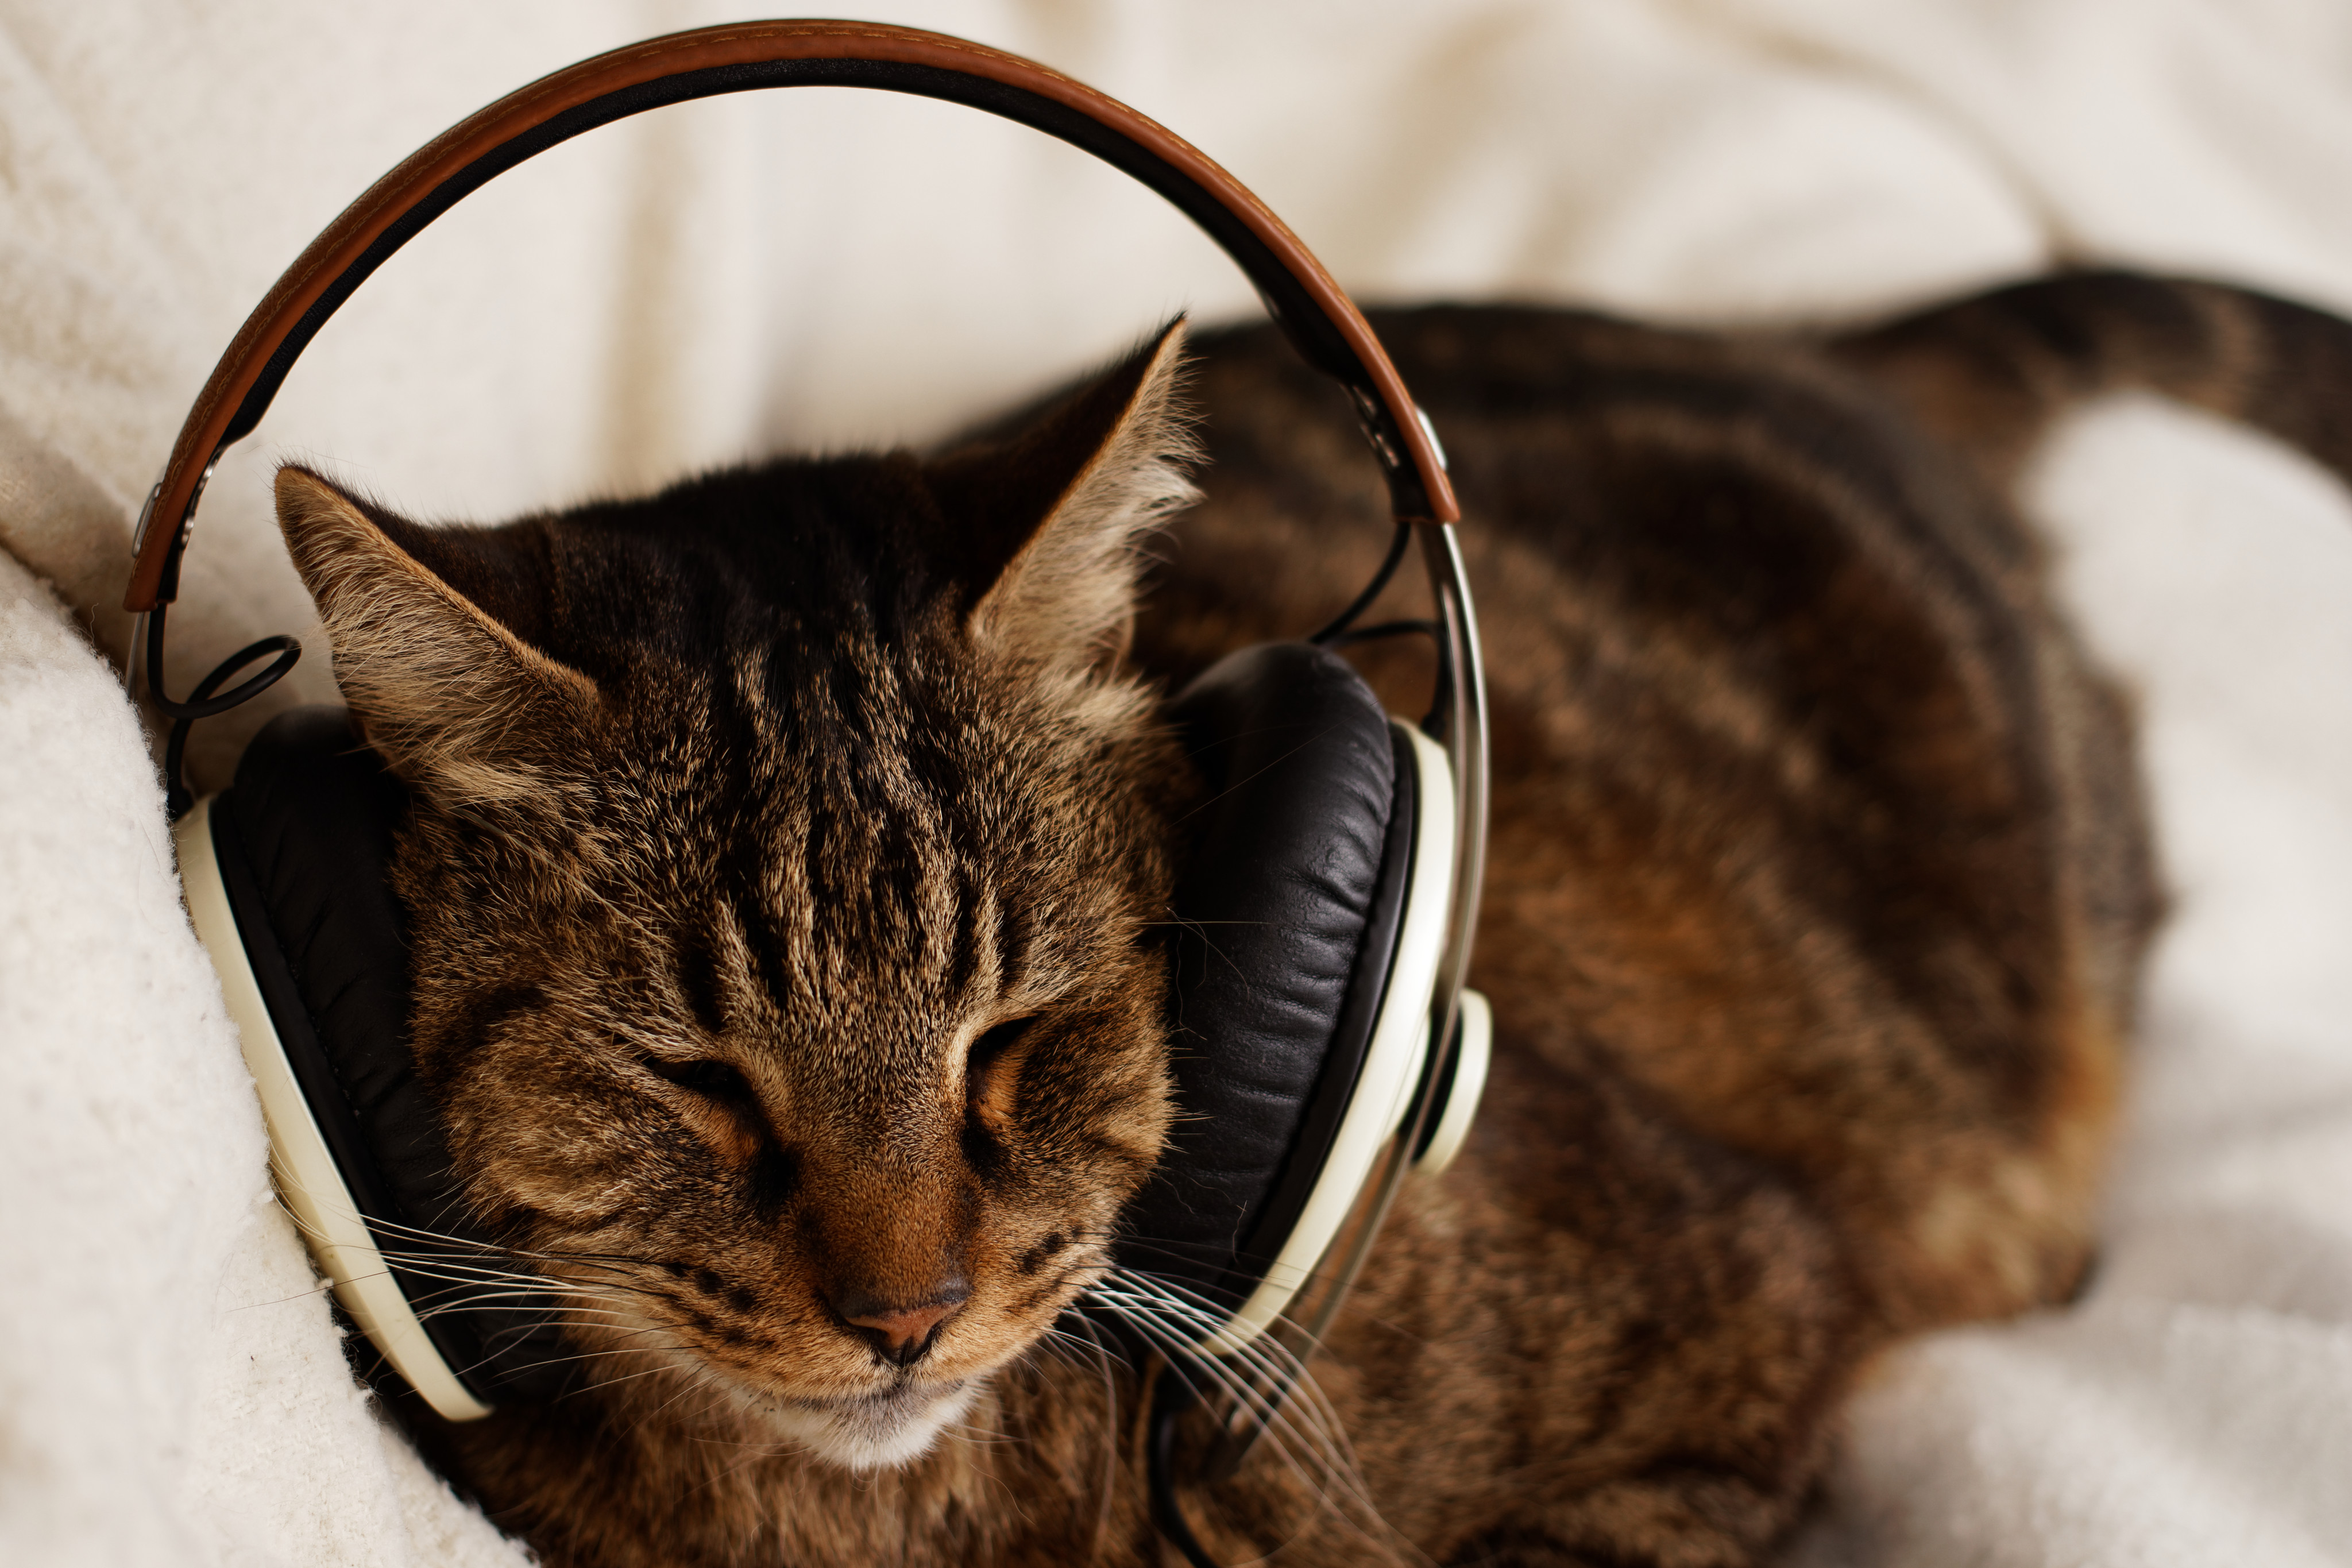 This week’s listening exercise is about three cats who are up for adoption. Photo: Shutterstock 